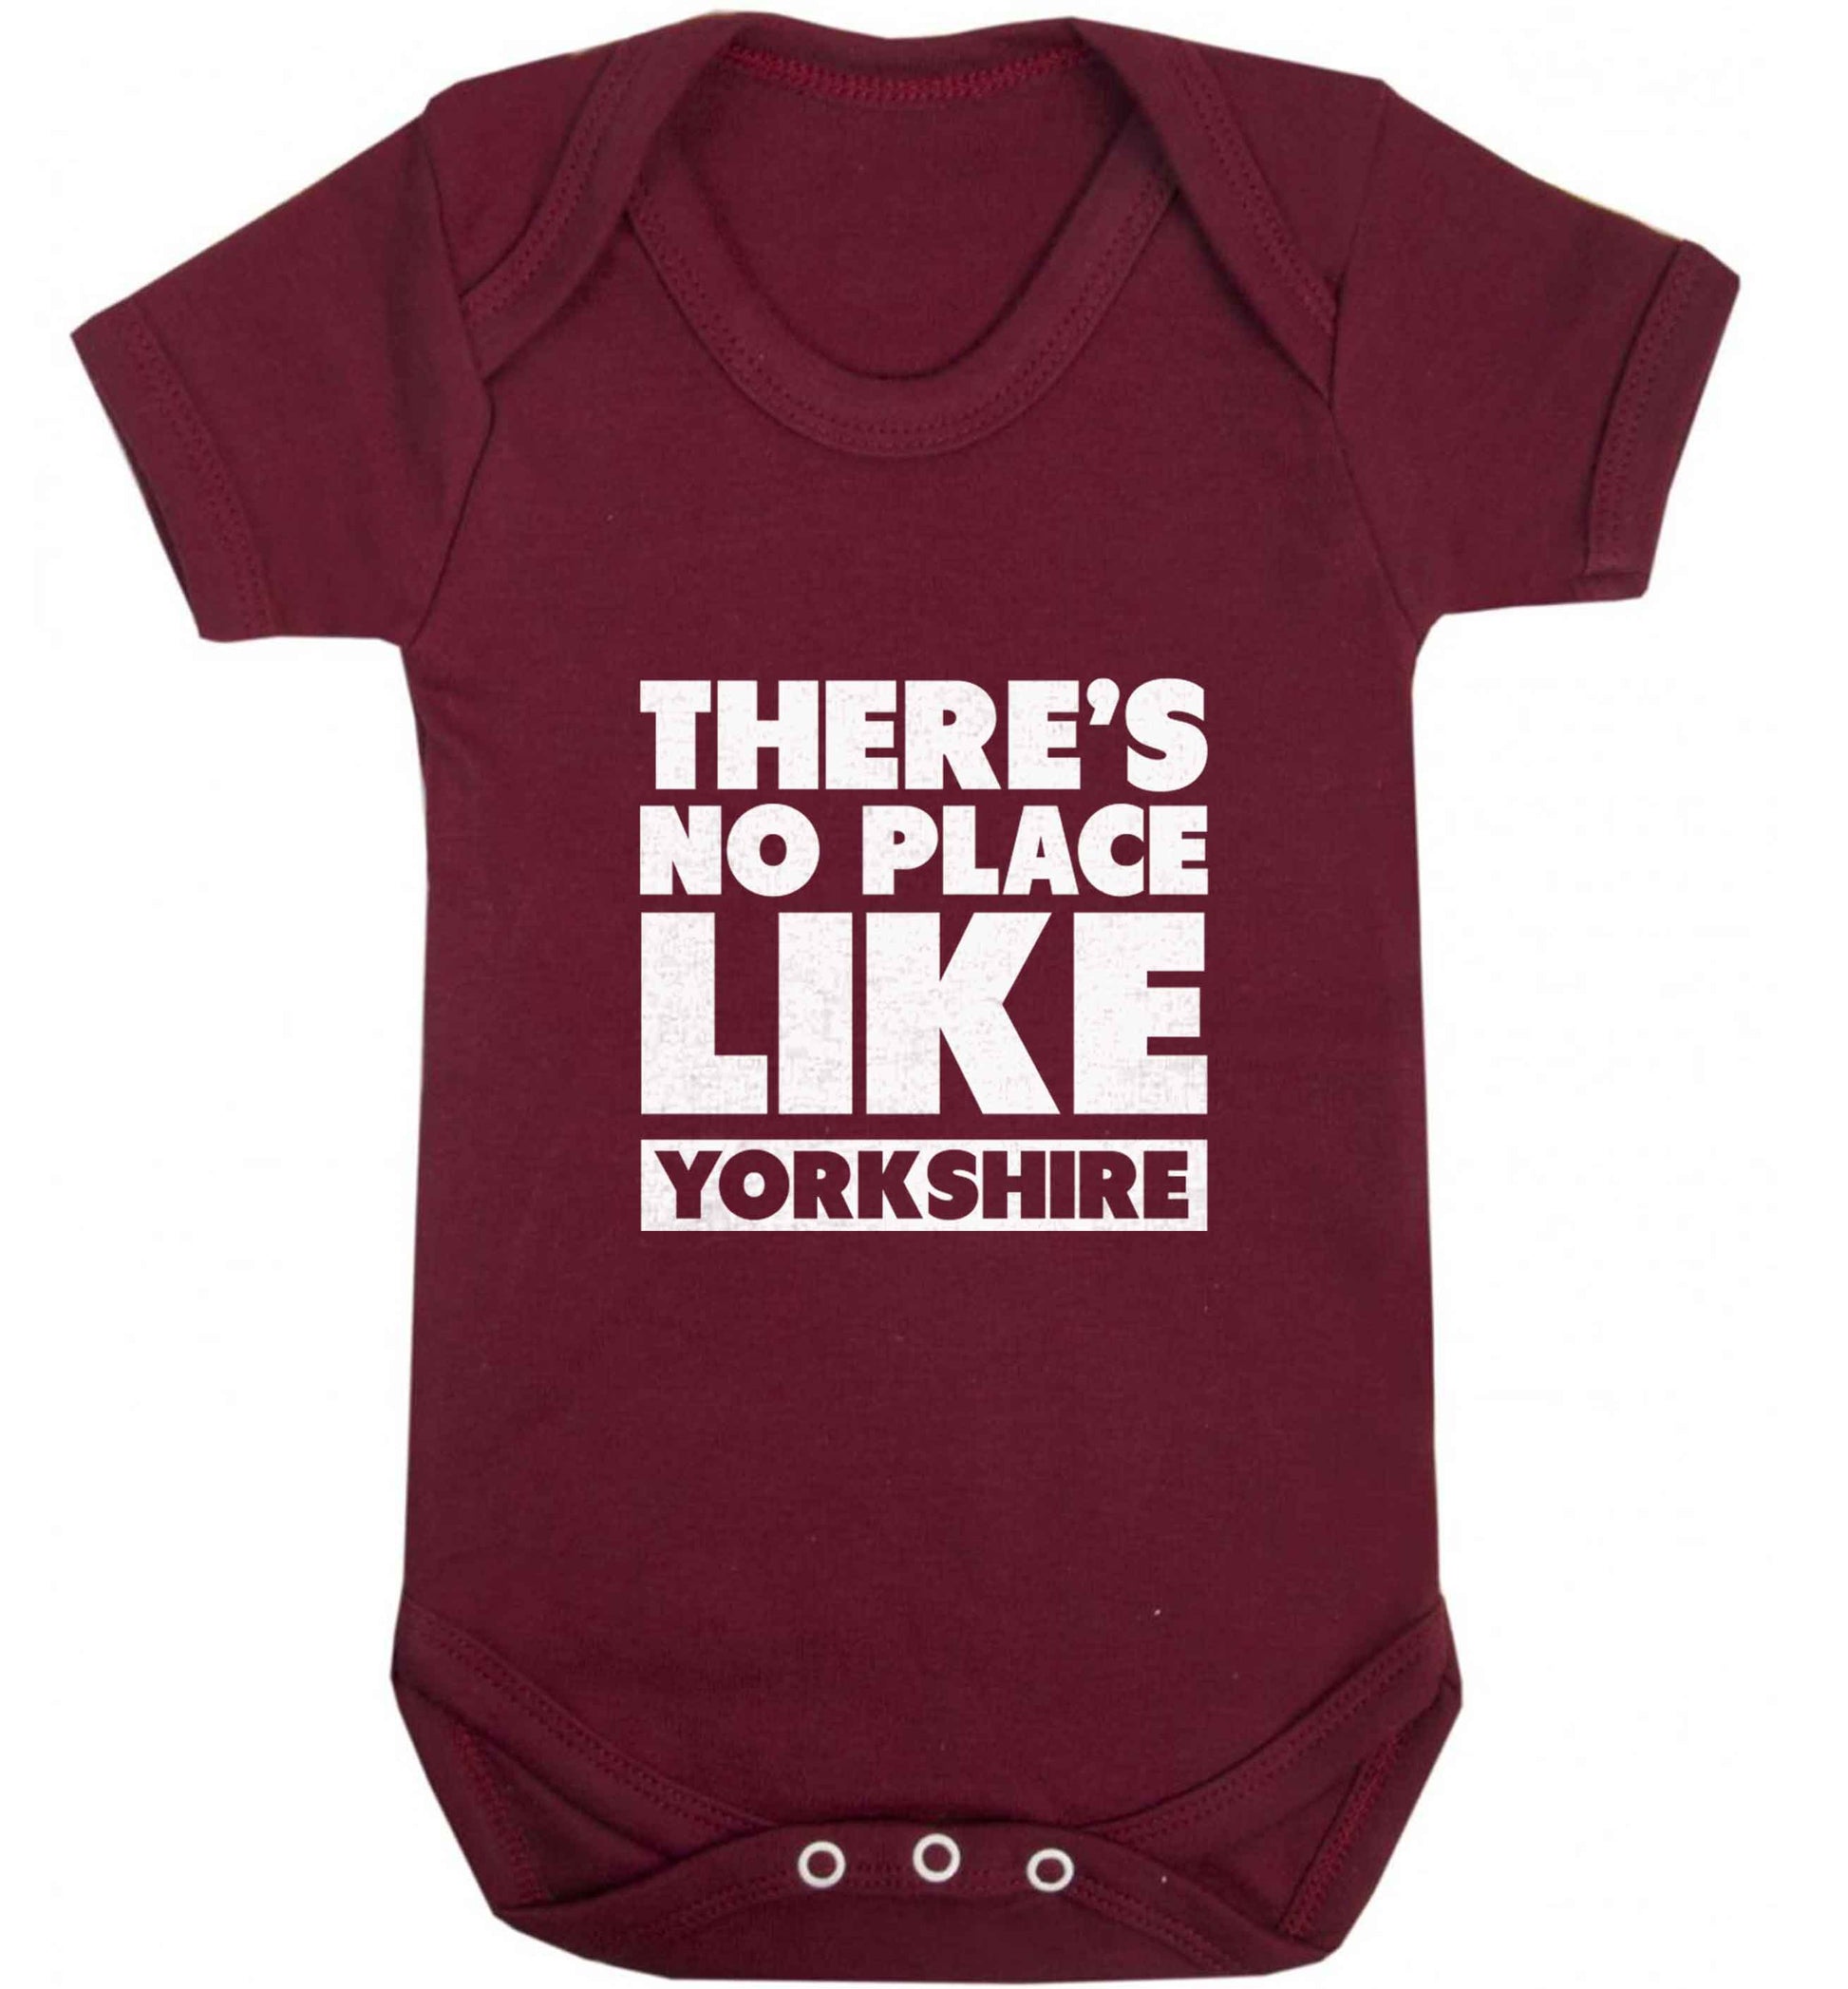 There's no place like Yorkshire baby vest maroon 18-24 months